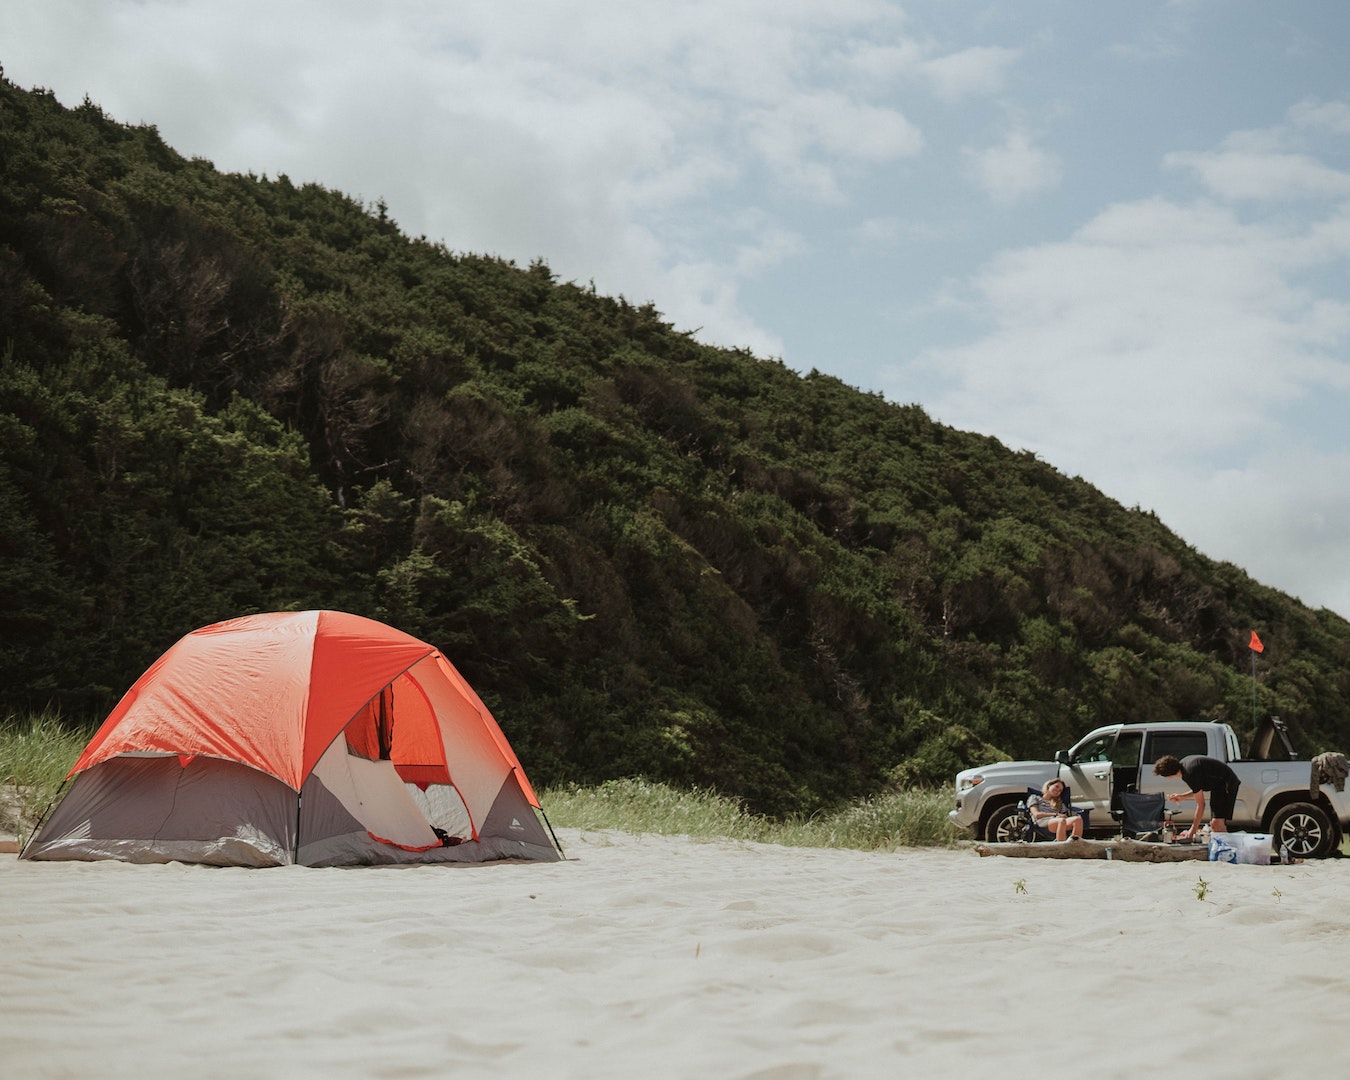 A Queensland beach campsite with an orange tent and large ute.